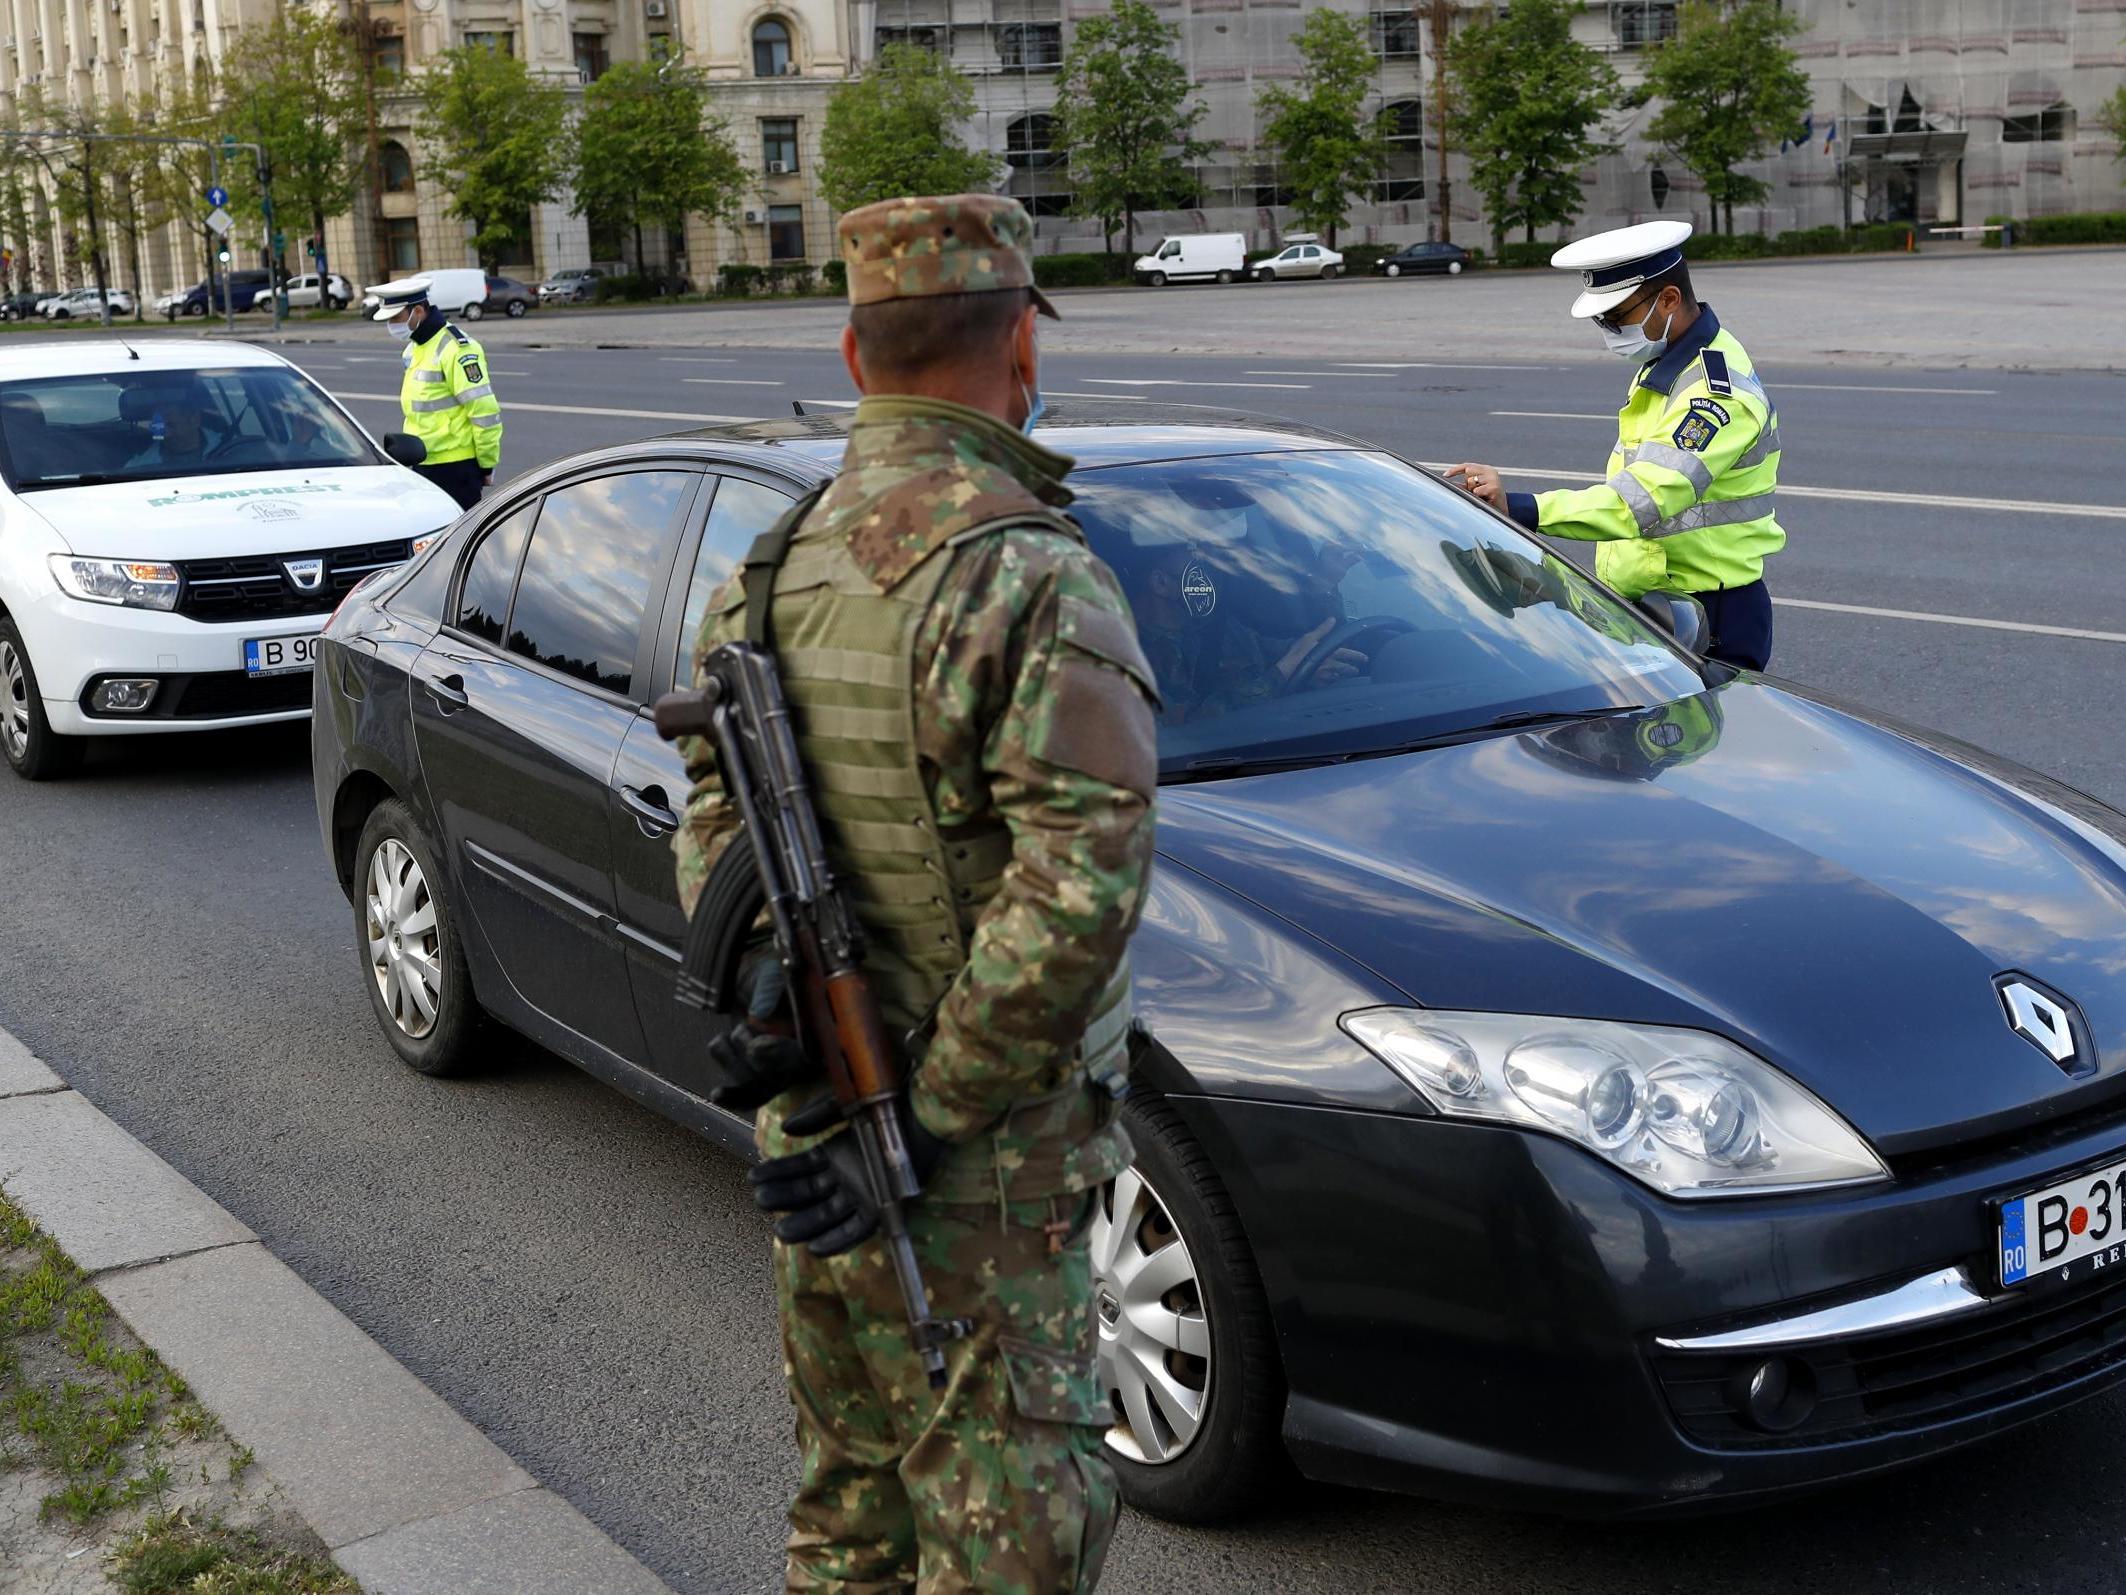 Romanian policemen check the papers of two car drivers as an armed military man (C) watches the scene in downtown Bucharest, Romania, on 20 April 2020.